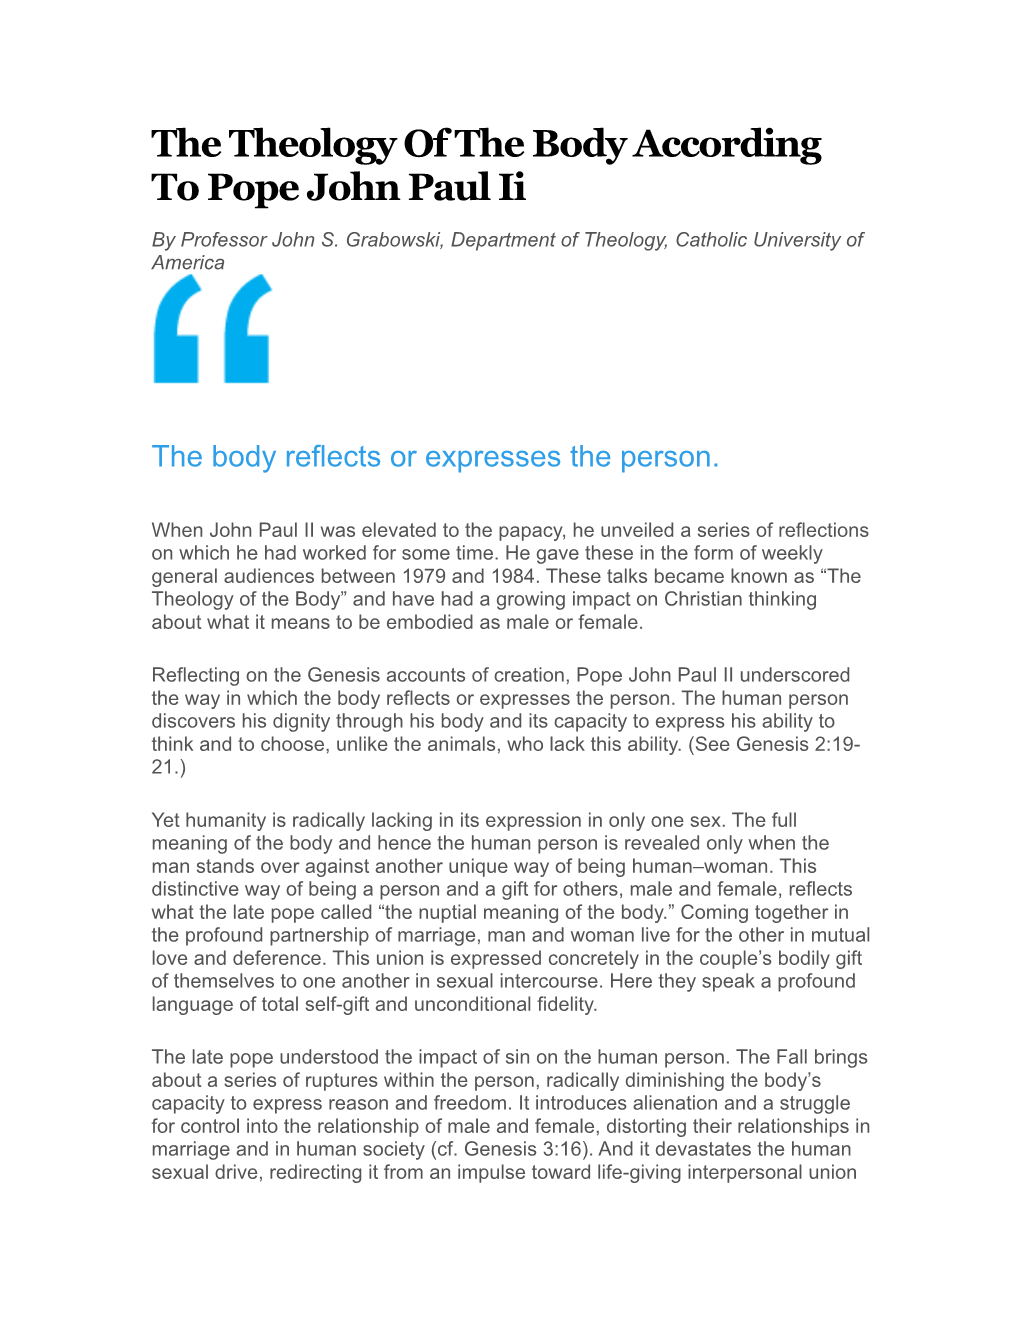 The Theology of the Body According to Pope John Paul Ii